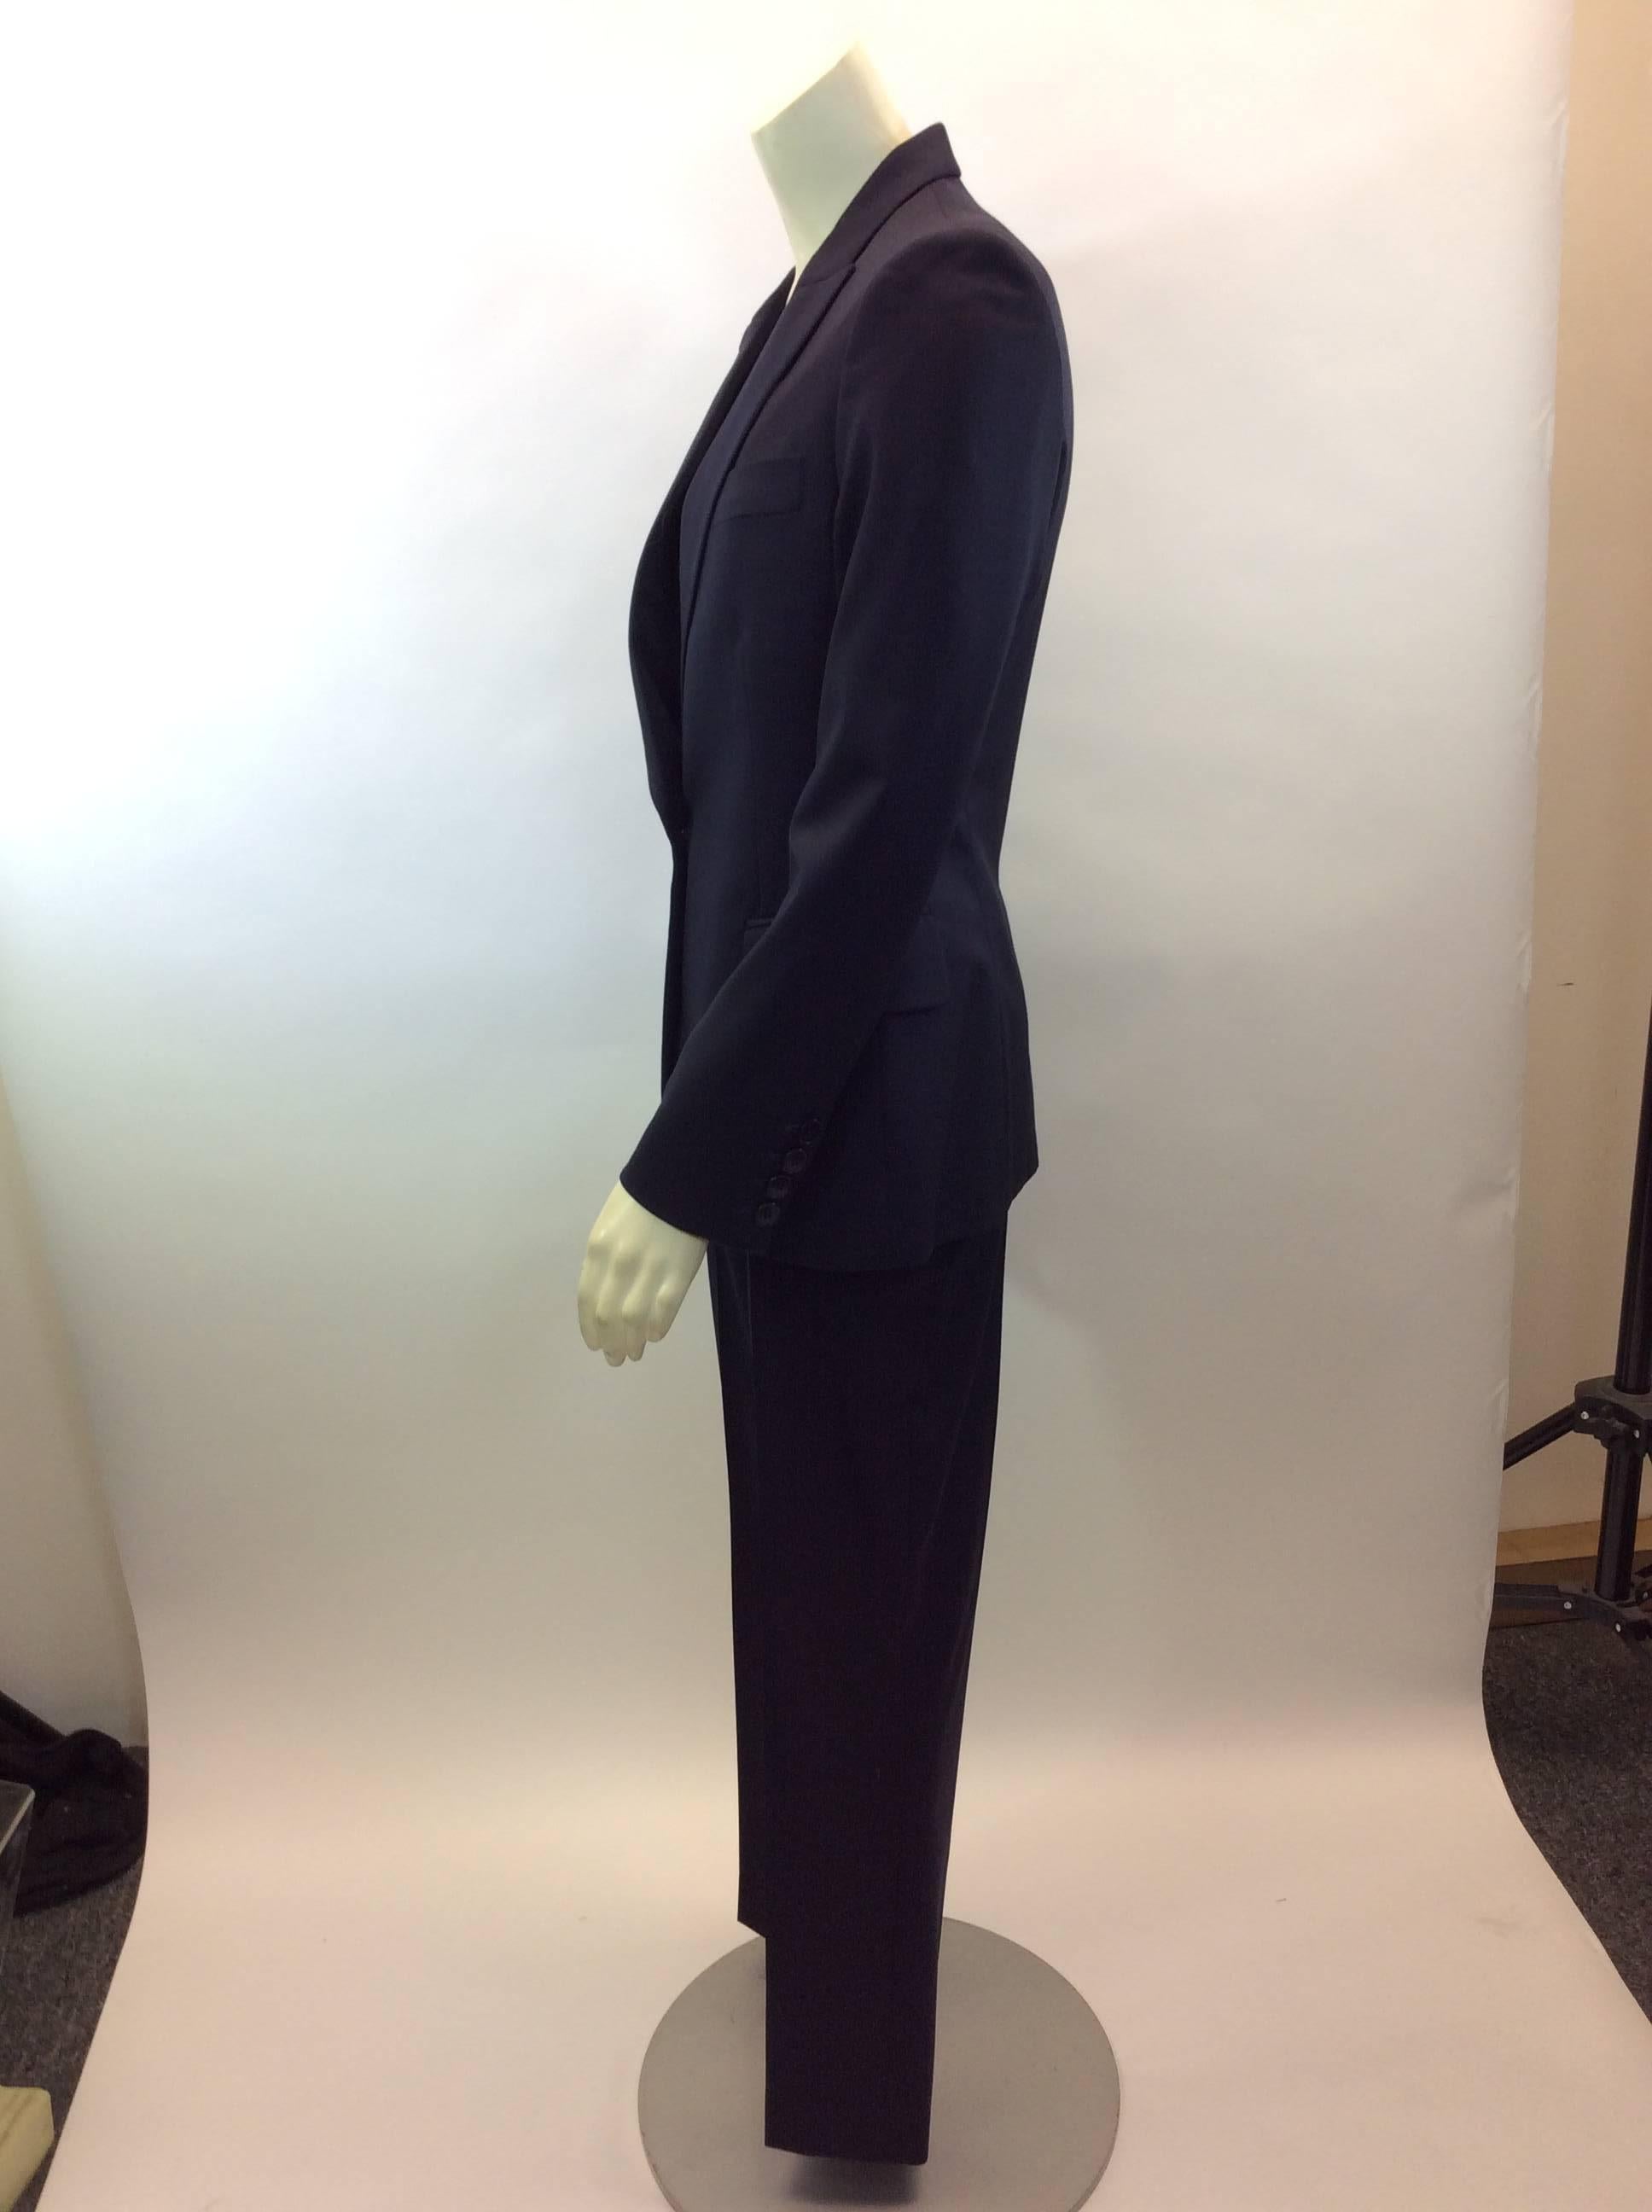 Stella McCartney Navy Pant Suit
$599
Made in Hungary
100% Wool 
Size 40
Jacket:
Length 27